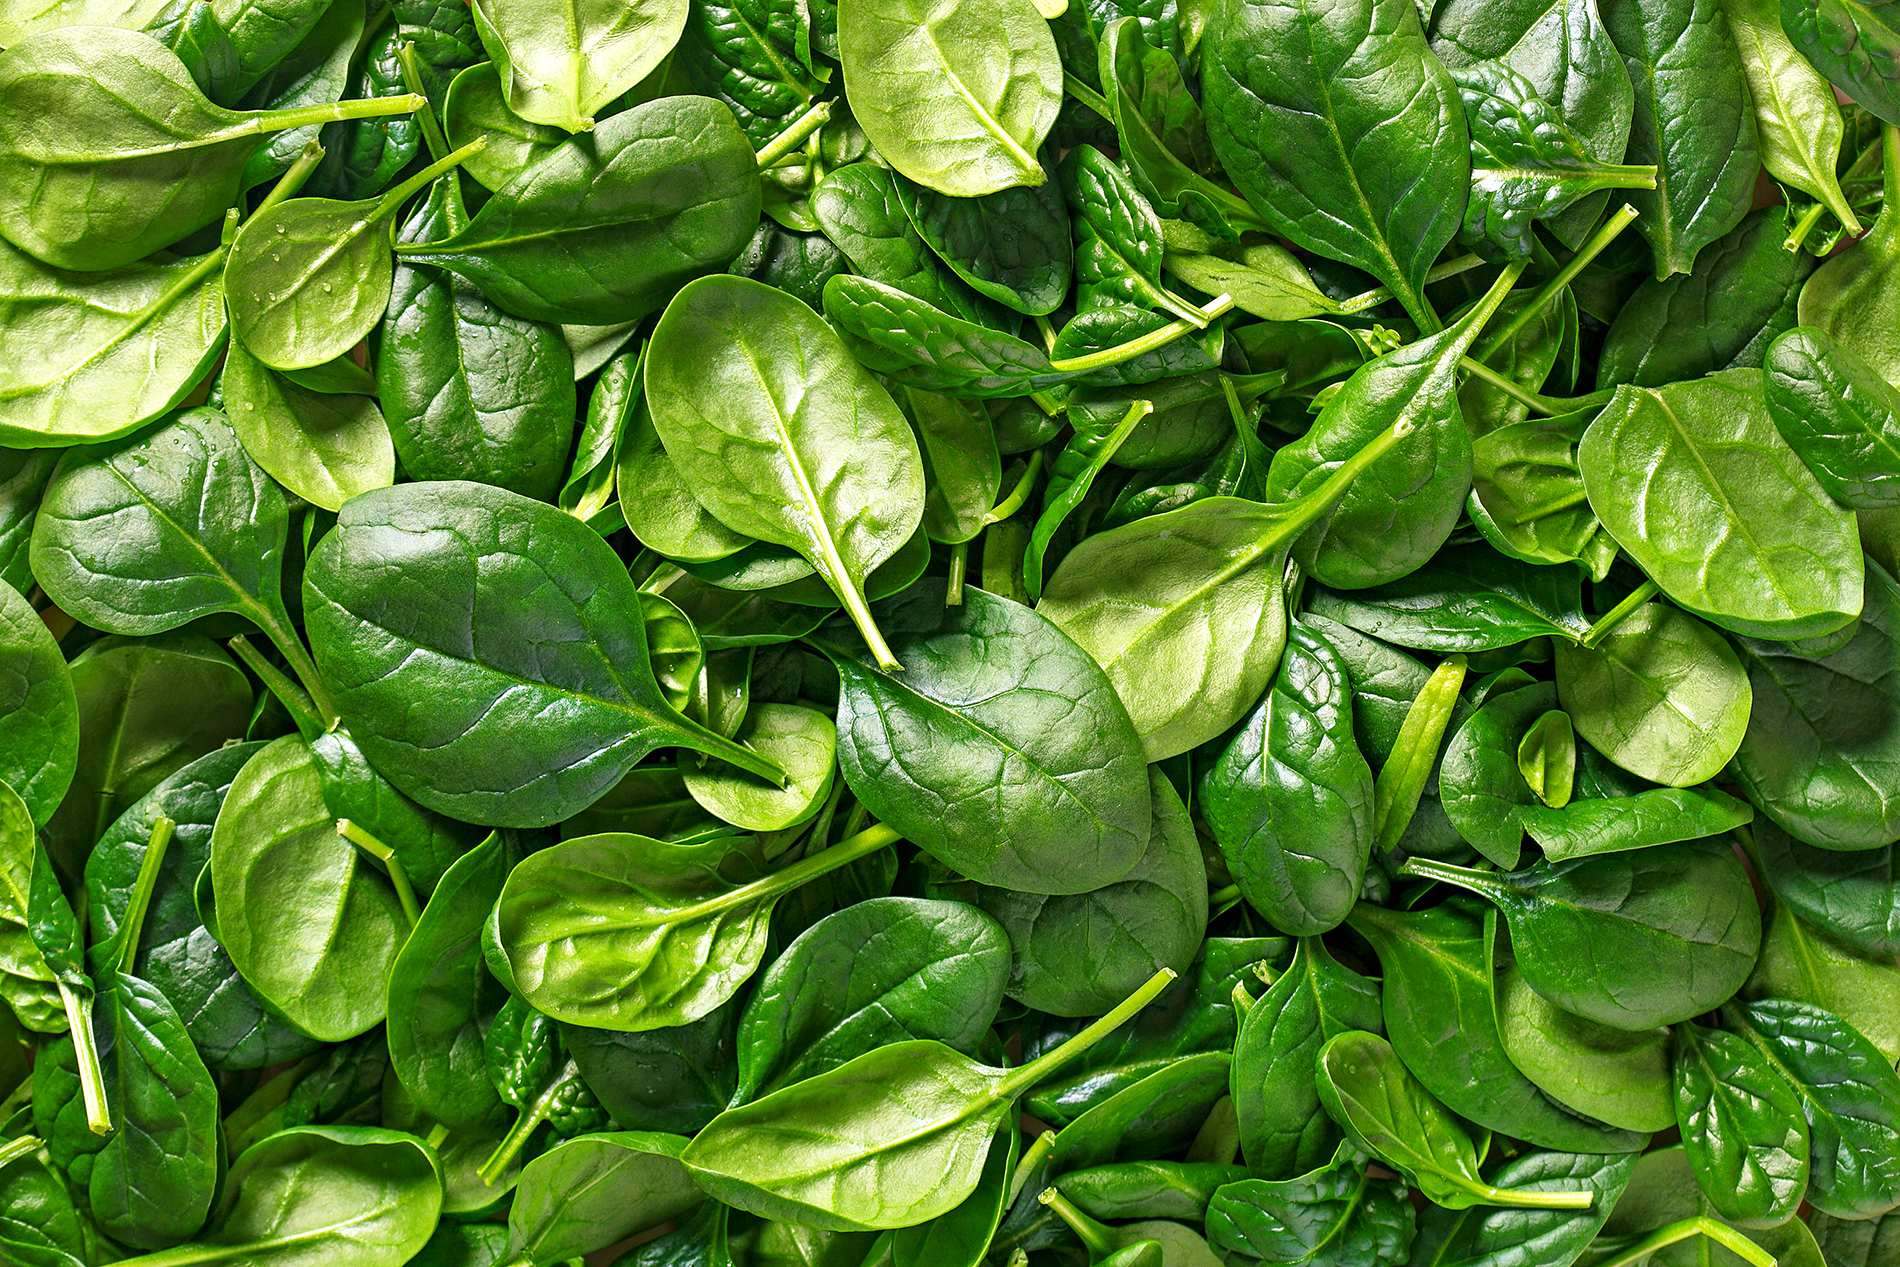 Close up photo of tender young spinach leaves